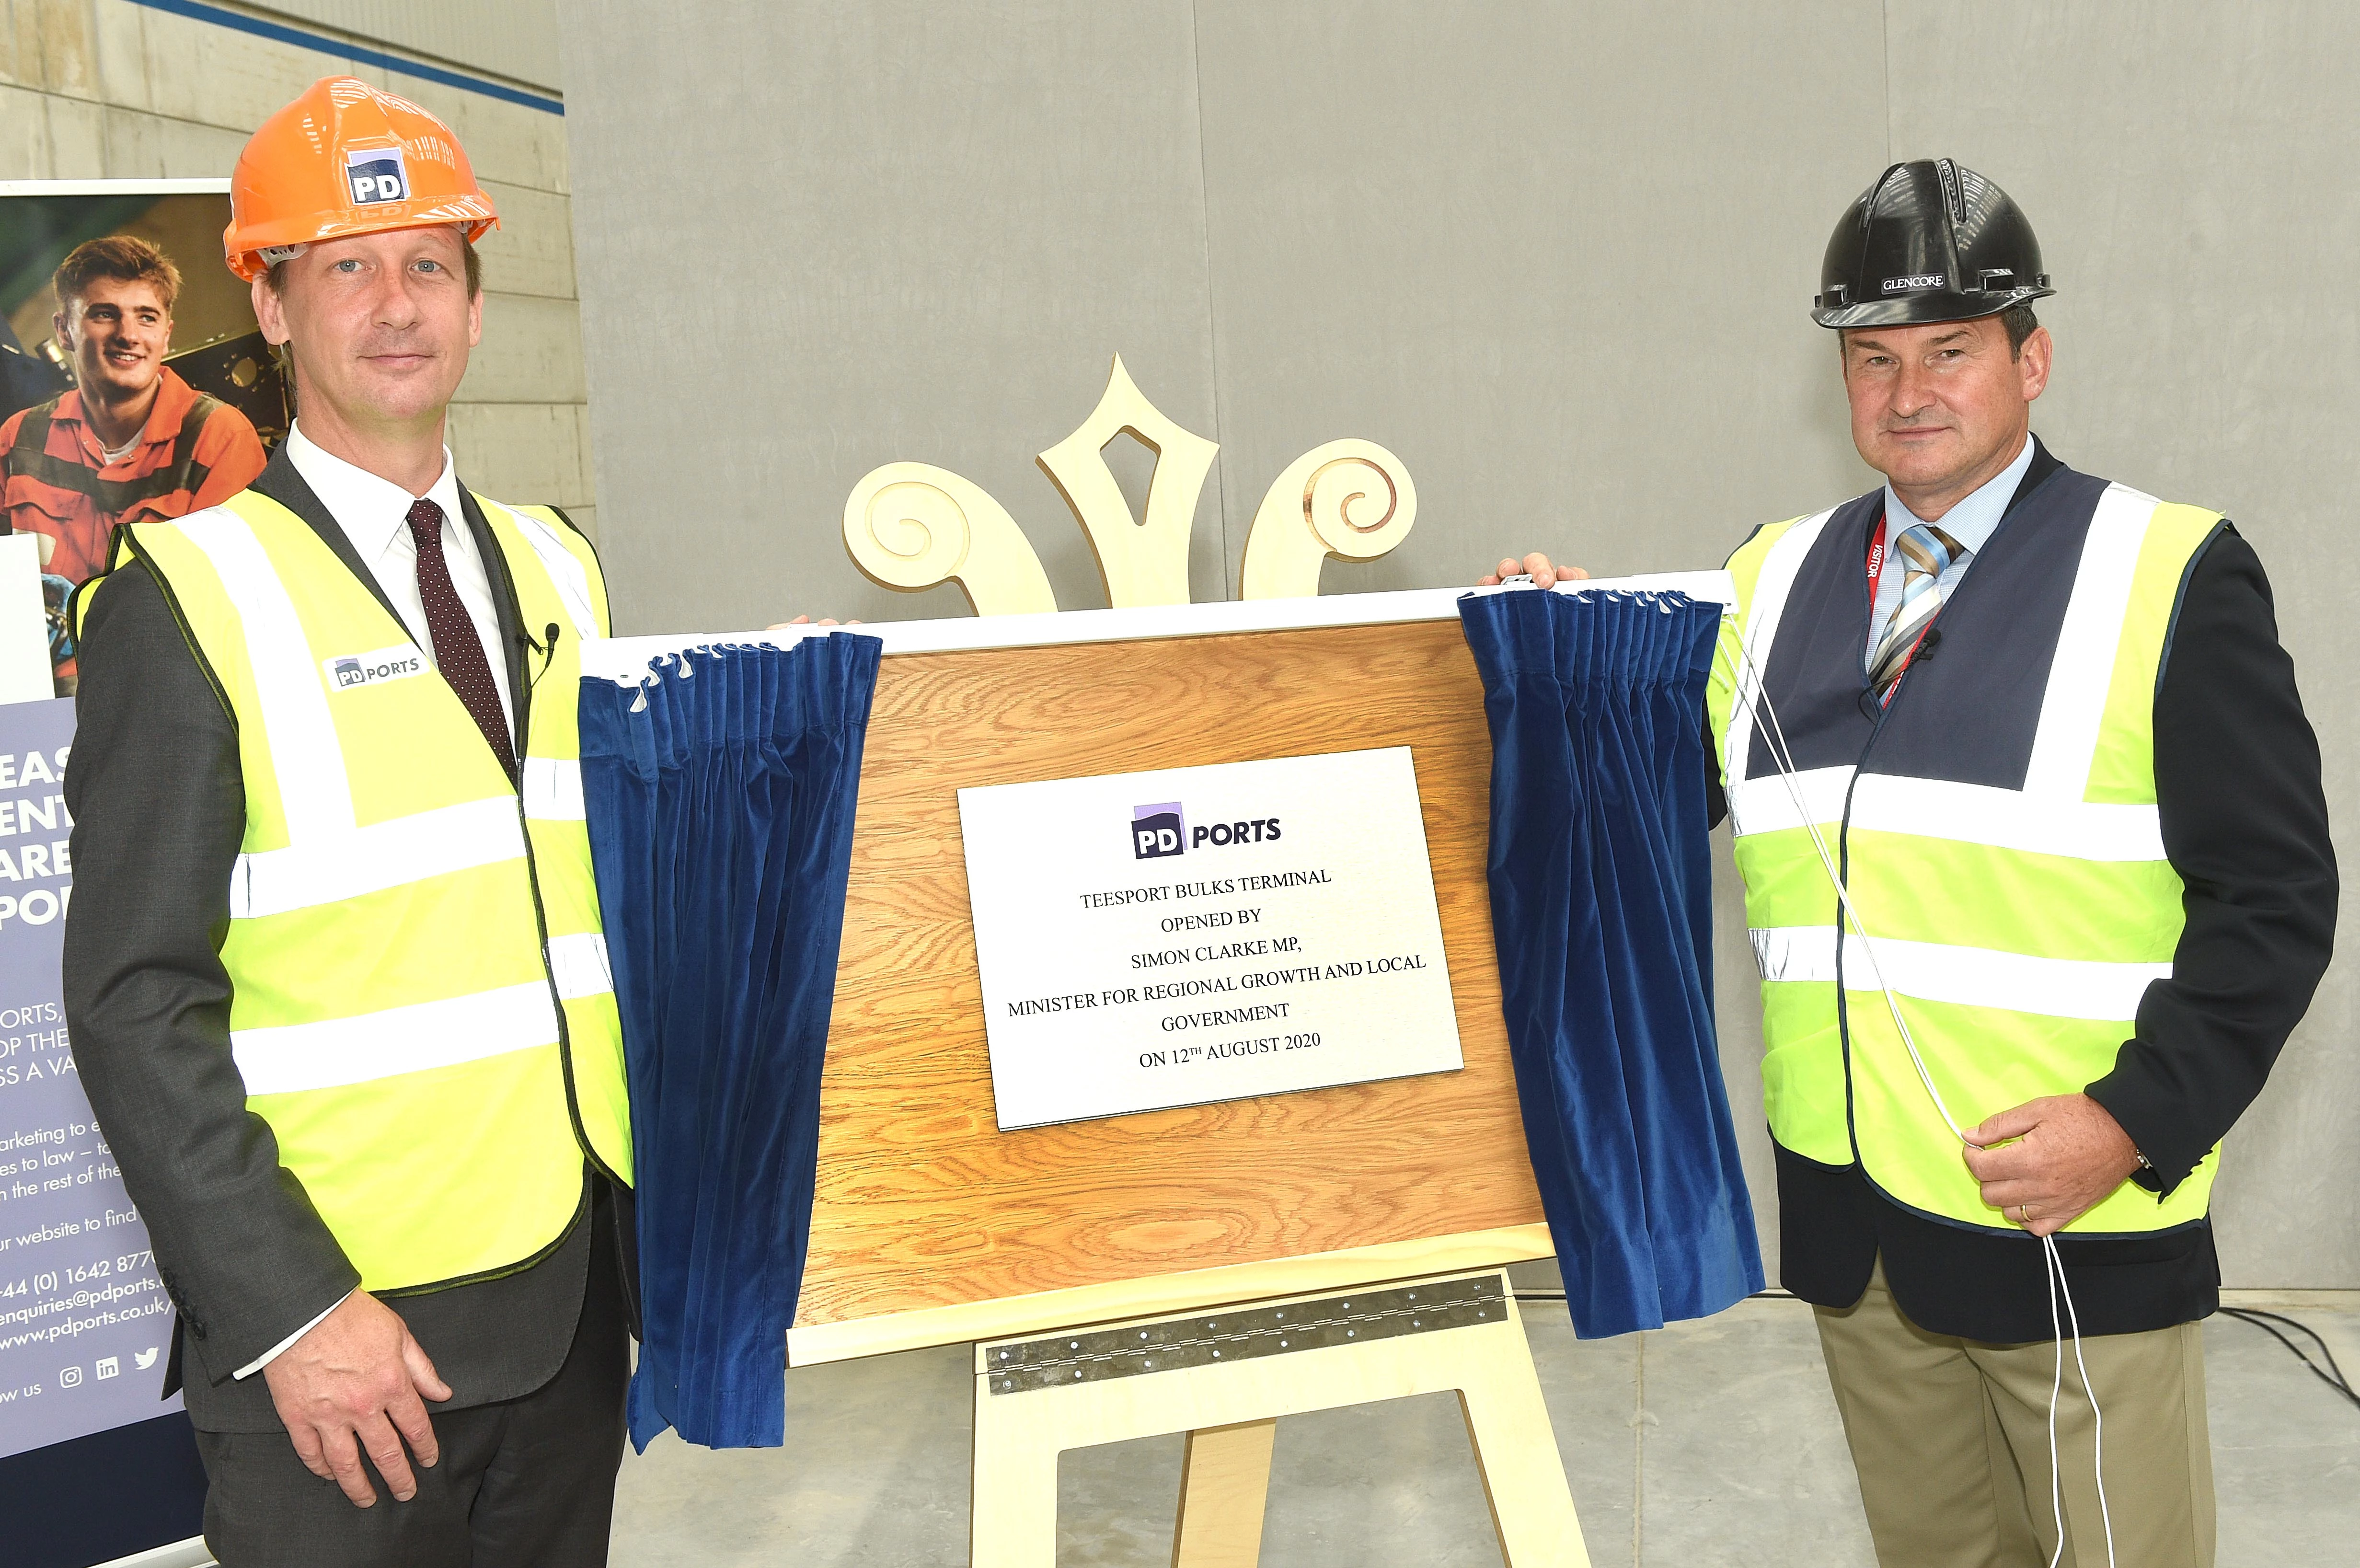 PD Ports CEO Frans Calje (left) during the unveiling of the Teesport Bulks Terminal 